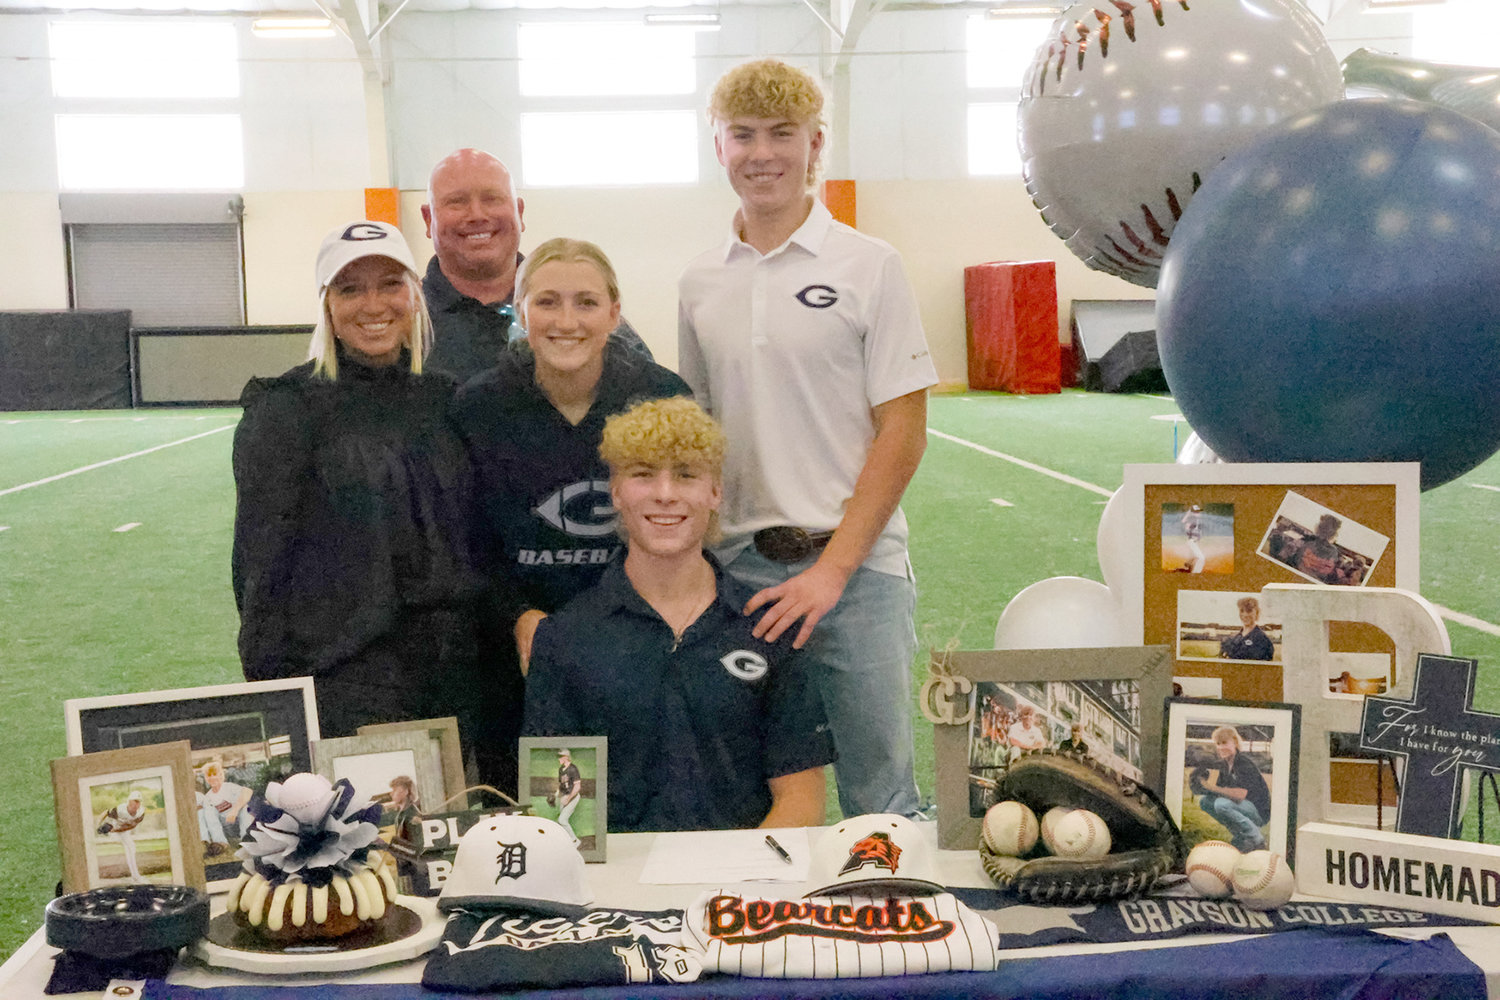 Bosten Dwinell – Grayson College baseball.Brittany, Dustin, Brooks and Parker